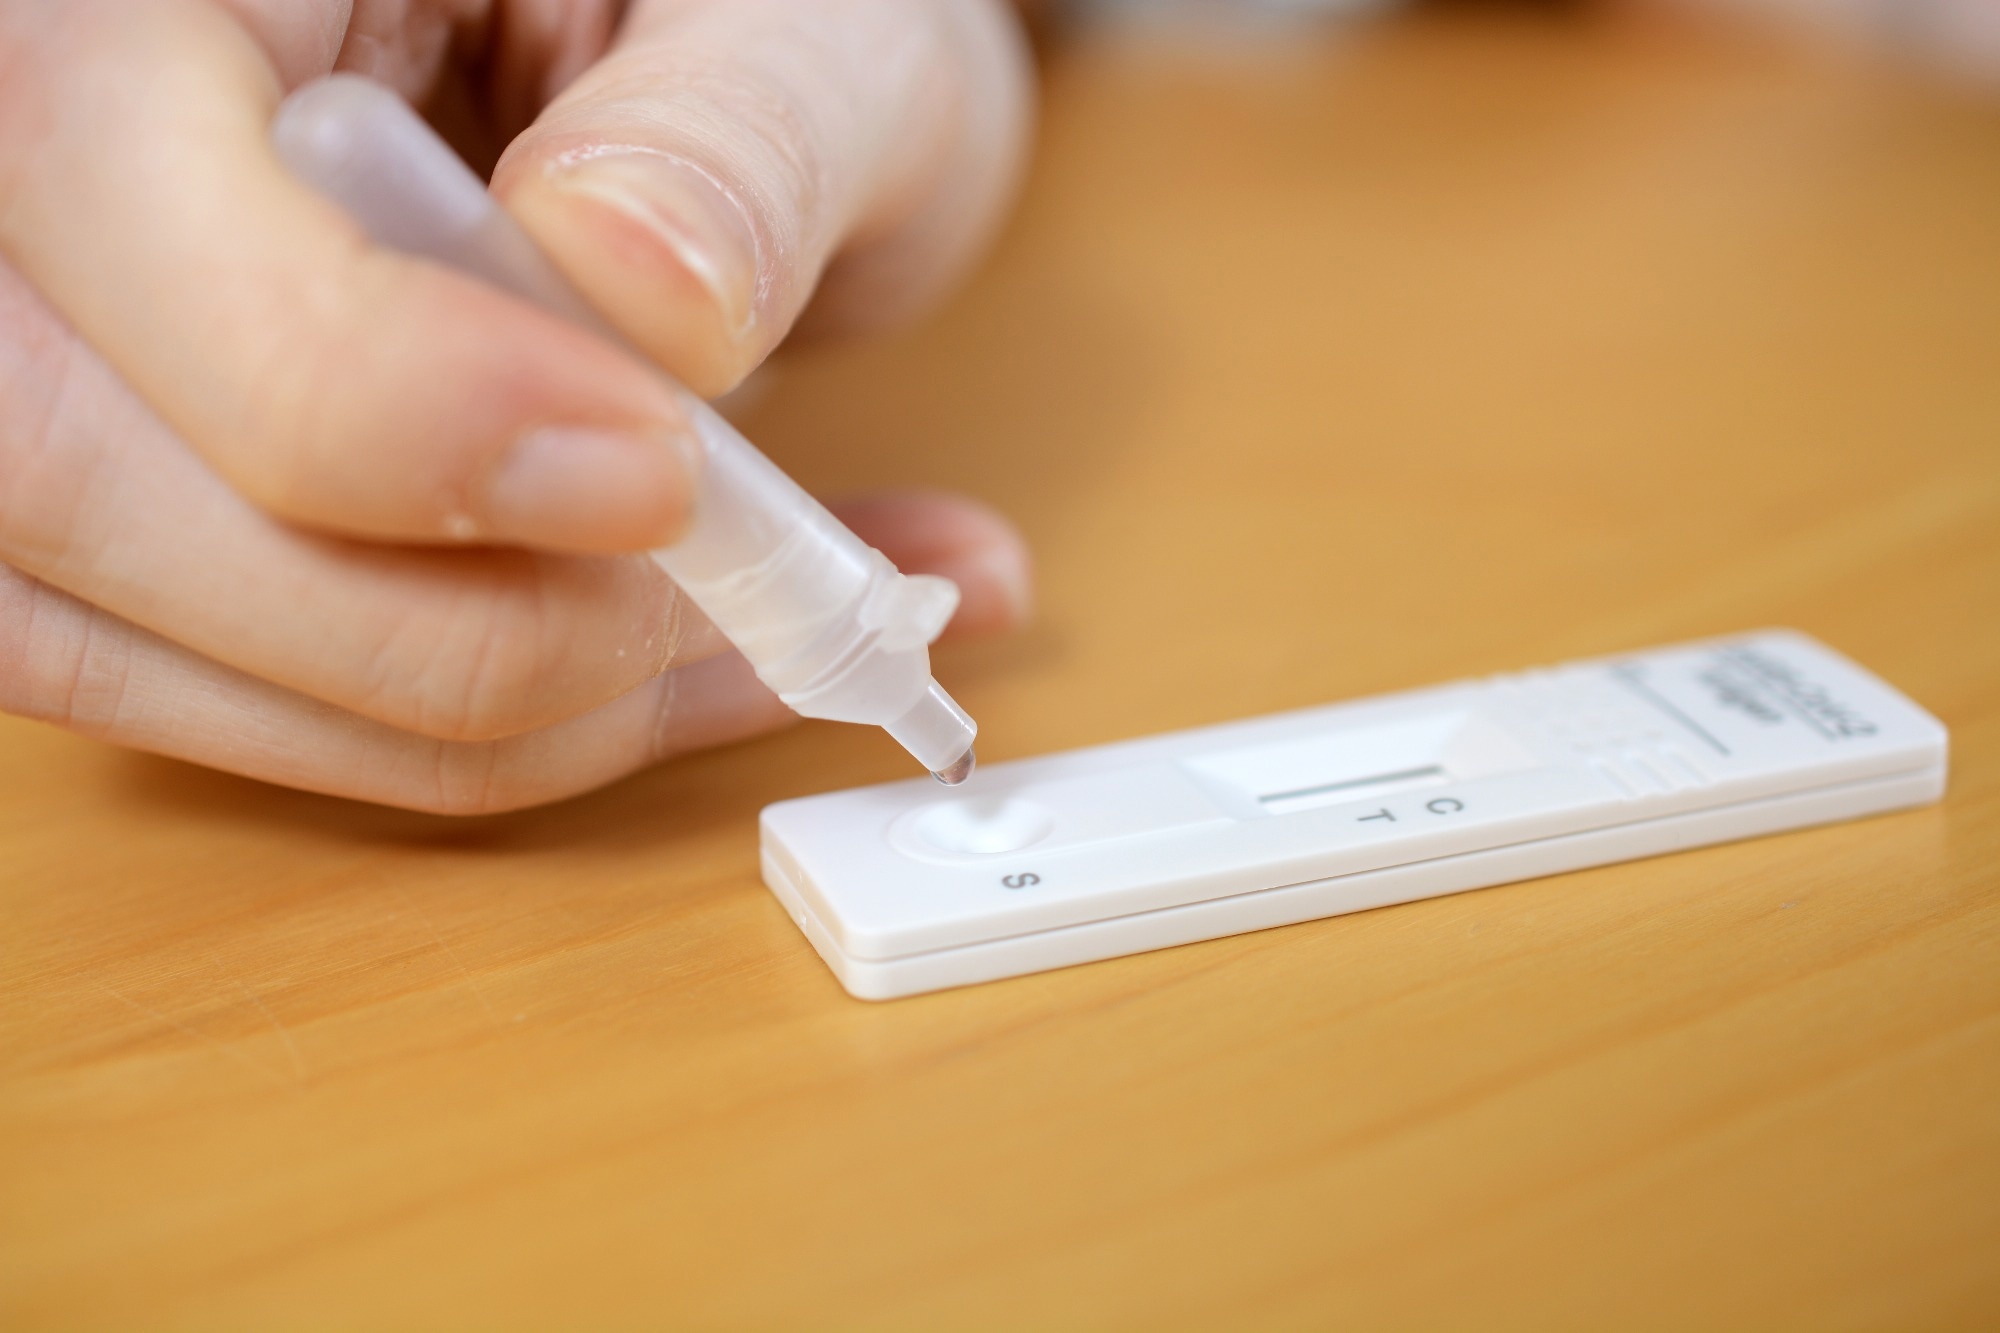 Study: Comparison of COVID-19 Antigen Rapid Test (Oral Fluid) and Real-Time RT-PCR in the laboratory diagnosis of SARS-CoV-2 infection. Image Credit: Dan Race/Shutterstock